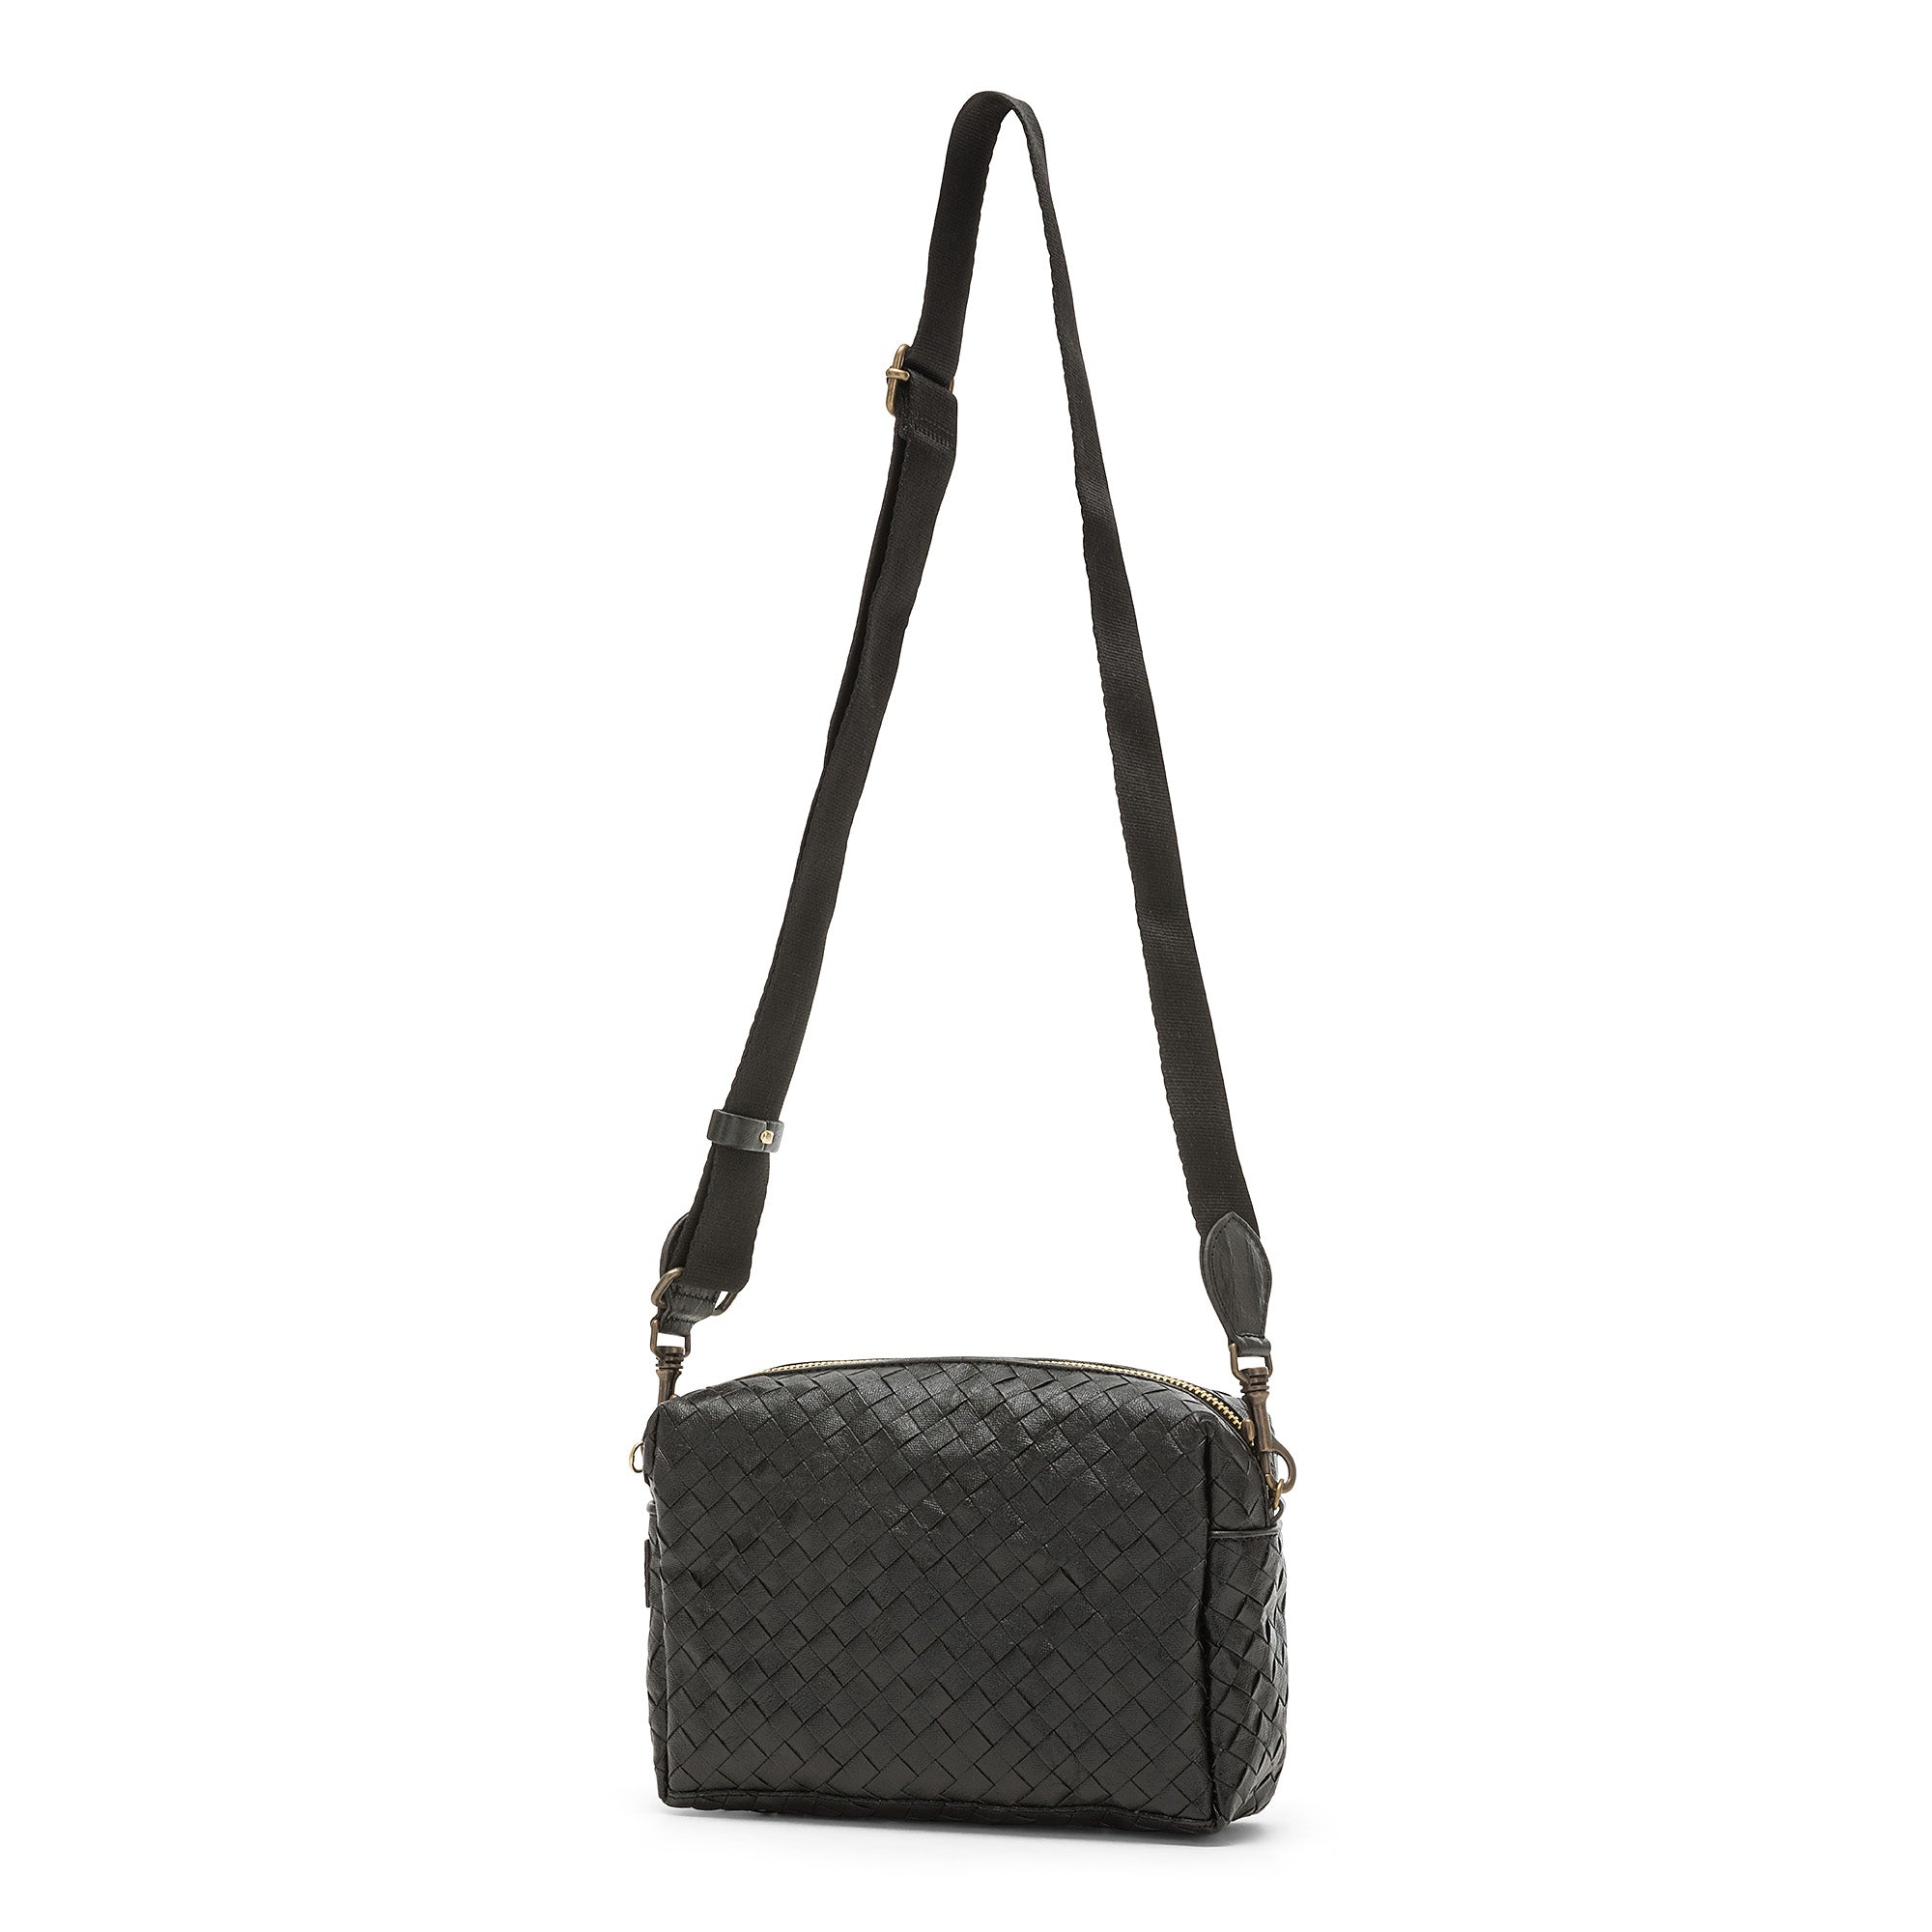 TRACOLLA CROSSBODY BAG LARGE WOVEN